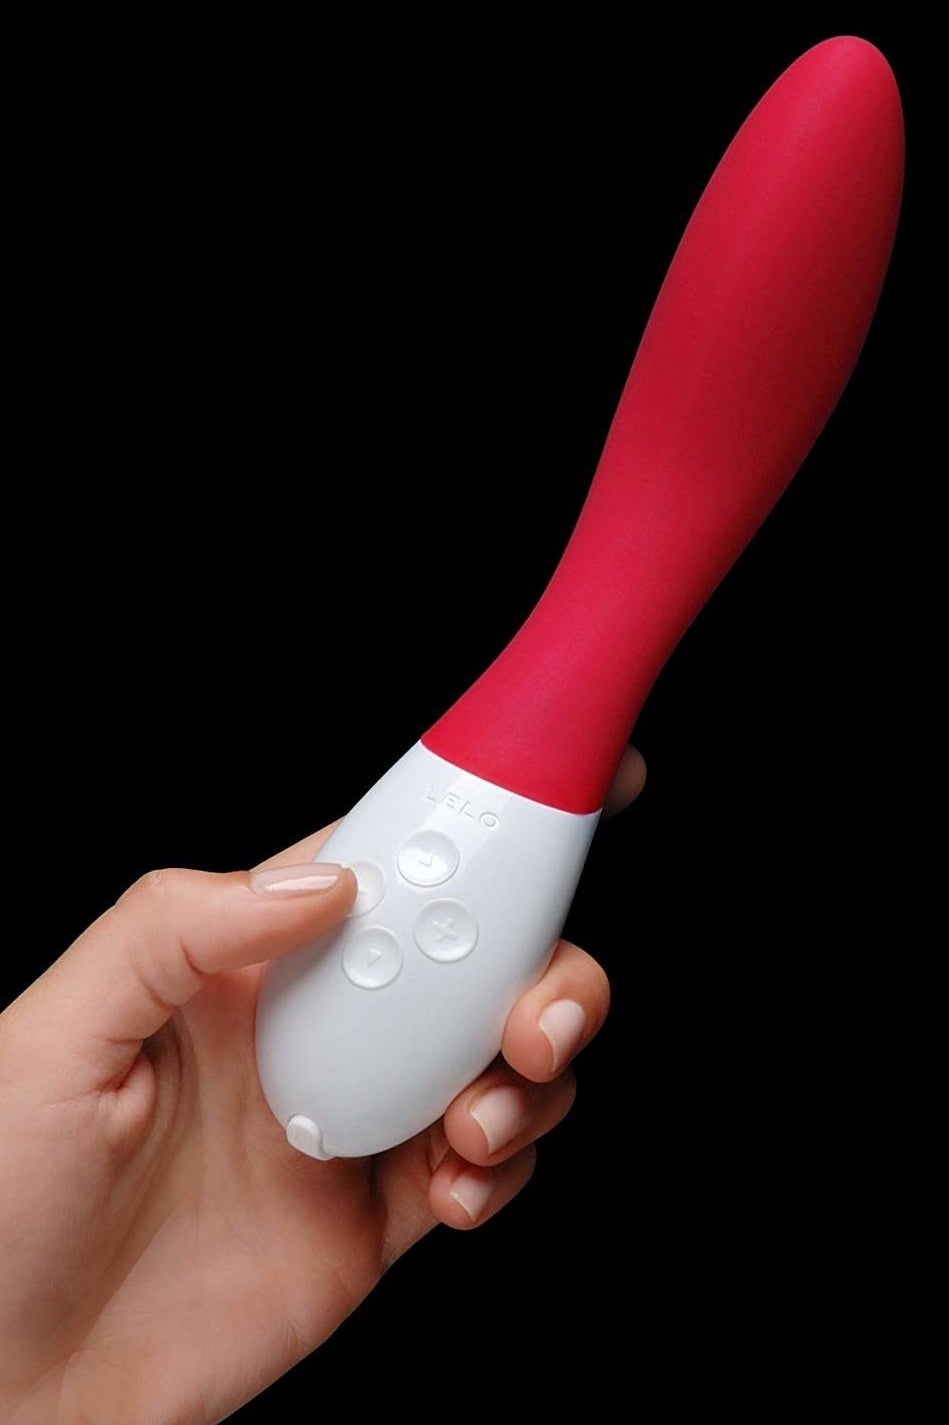 hand holding a red and white oblong vibrator